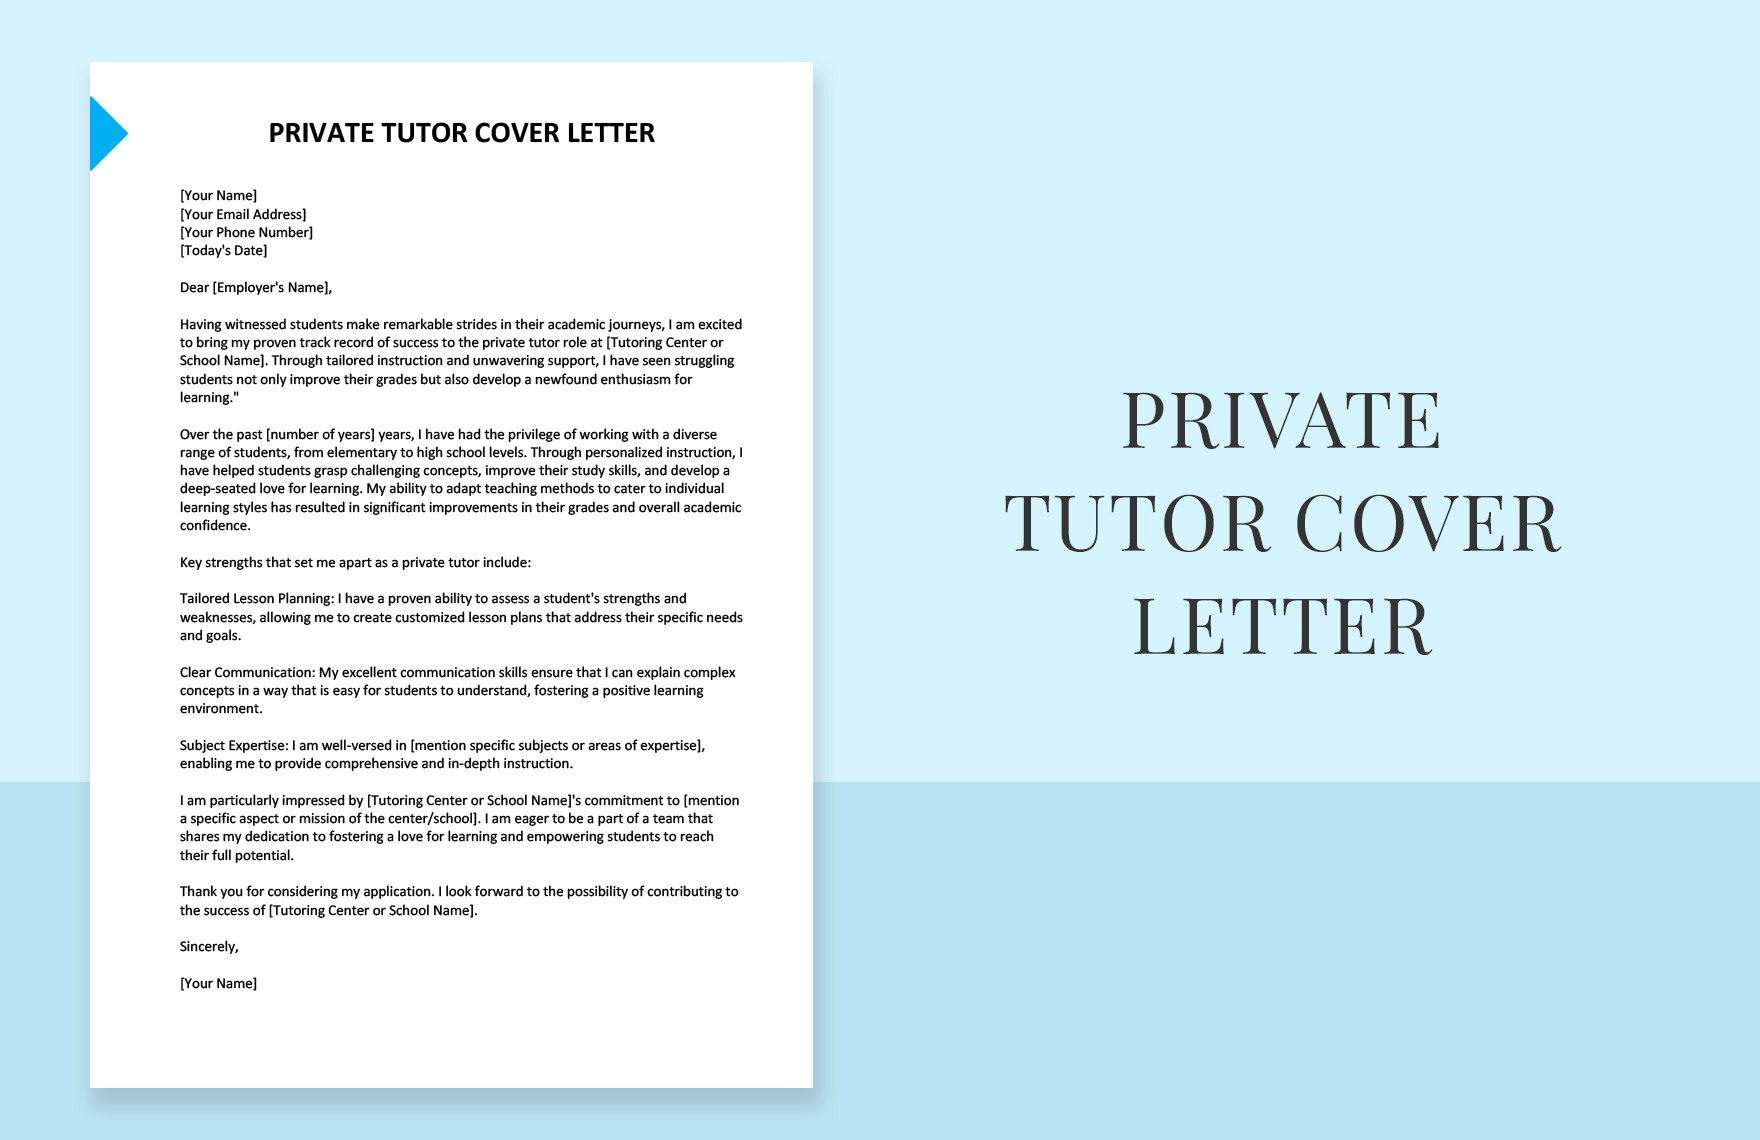 Private Tutor Cover Letter in Word, Google Docs